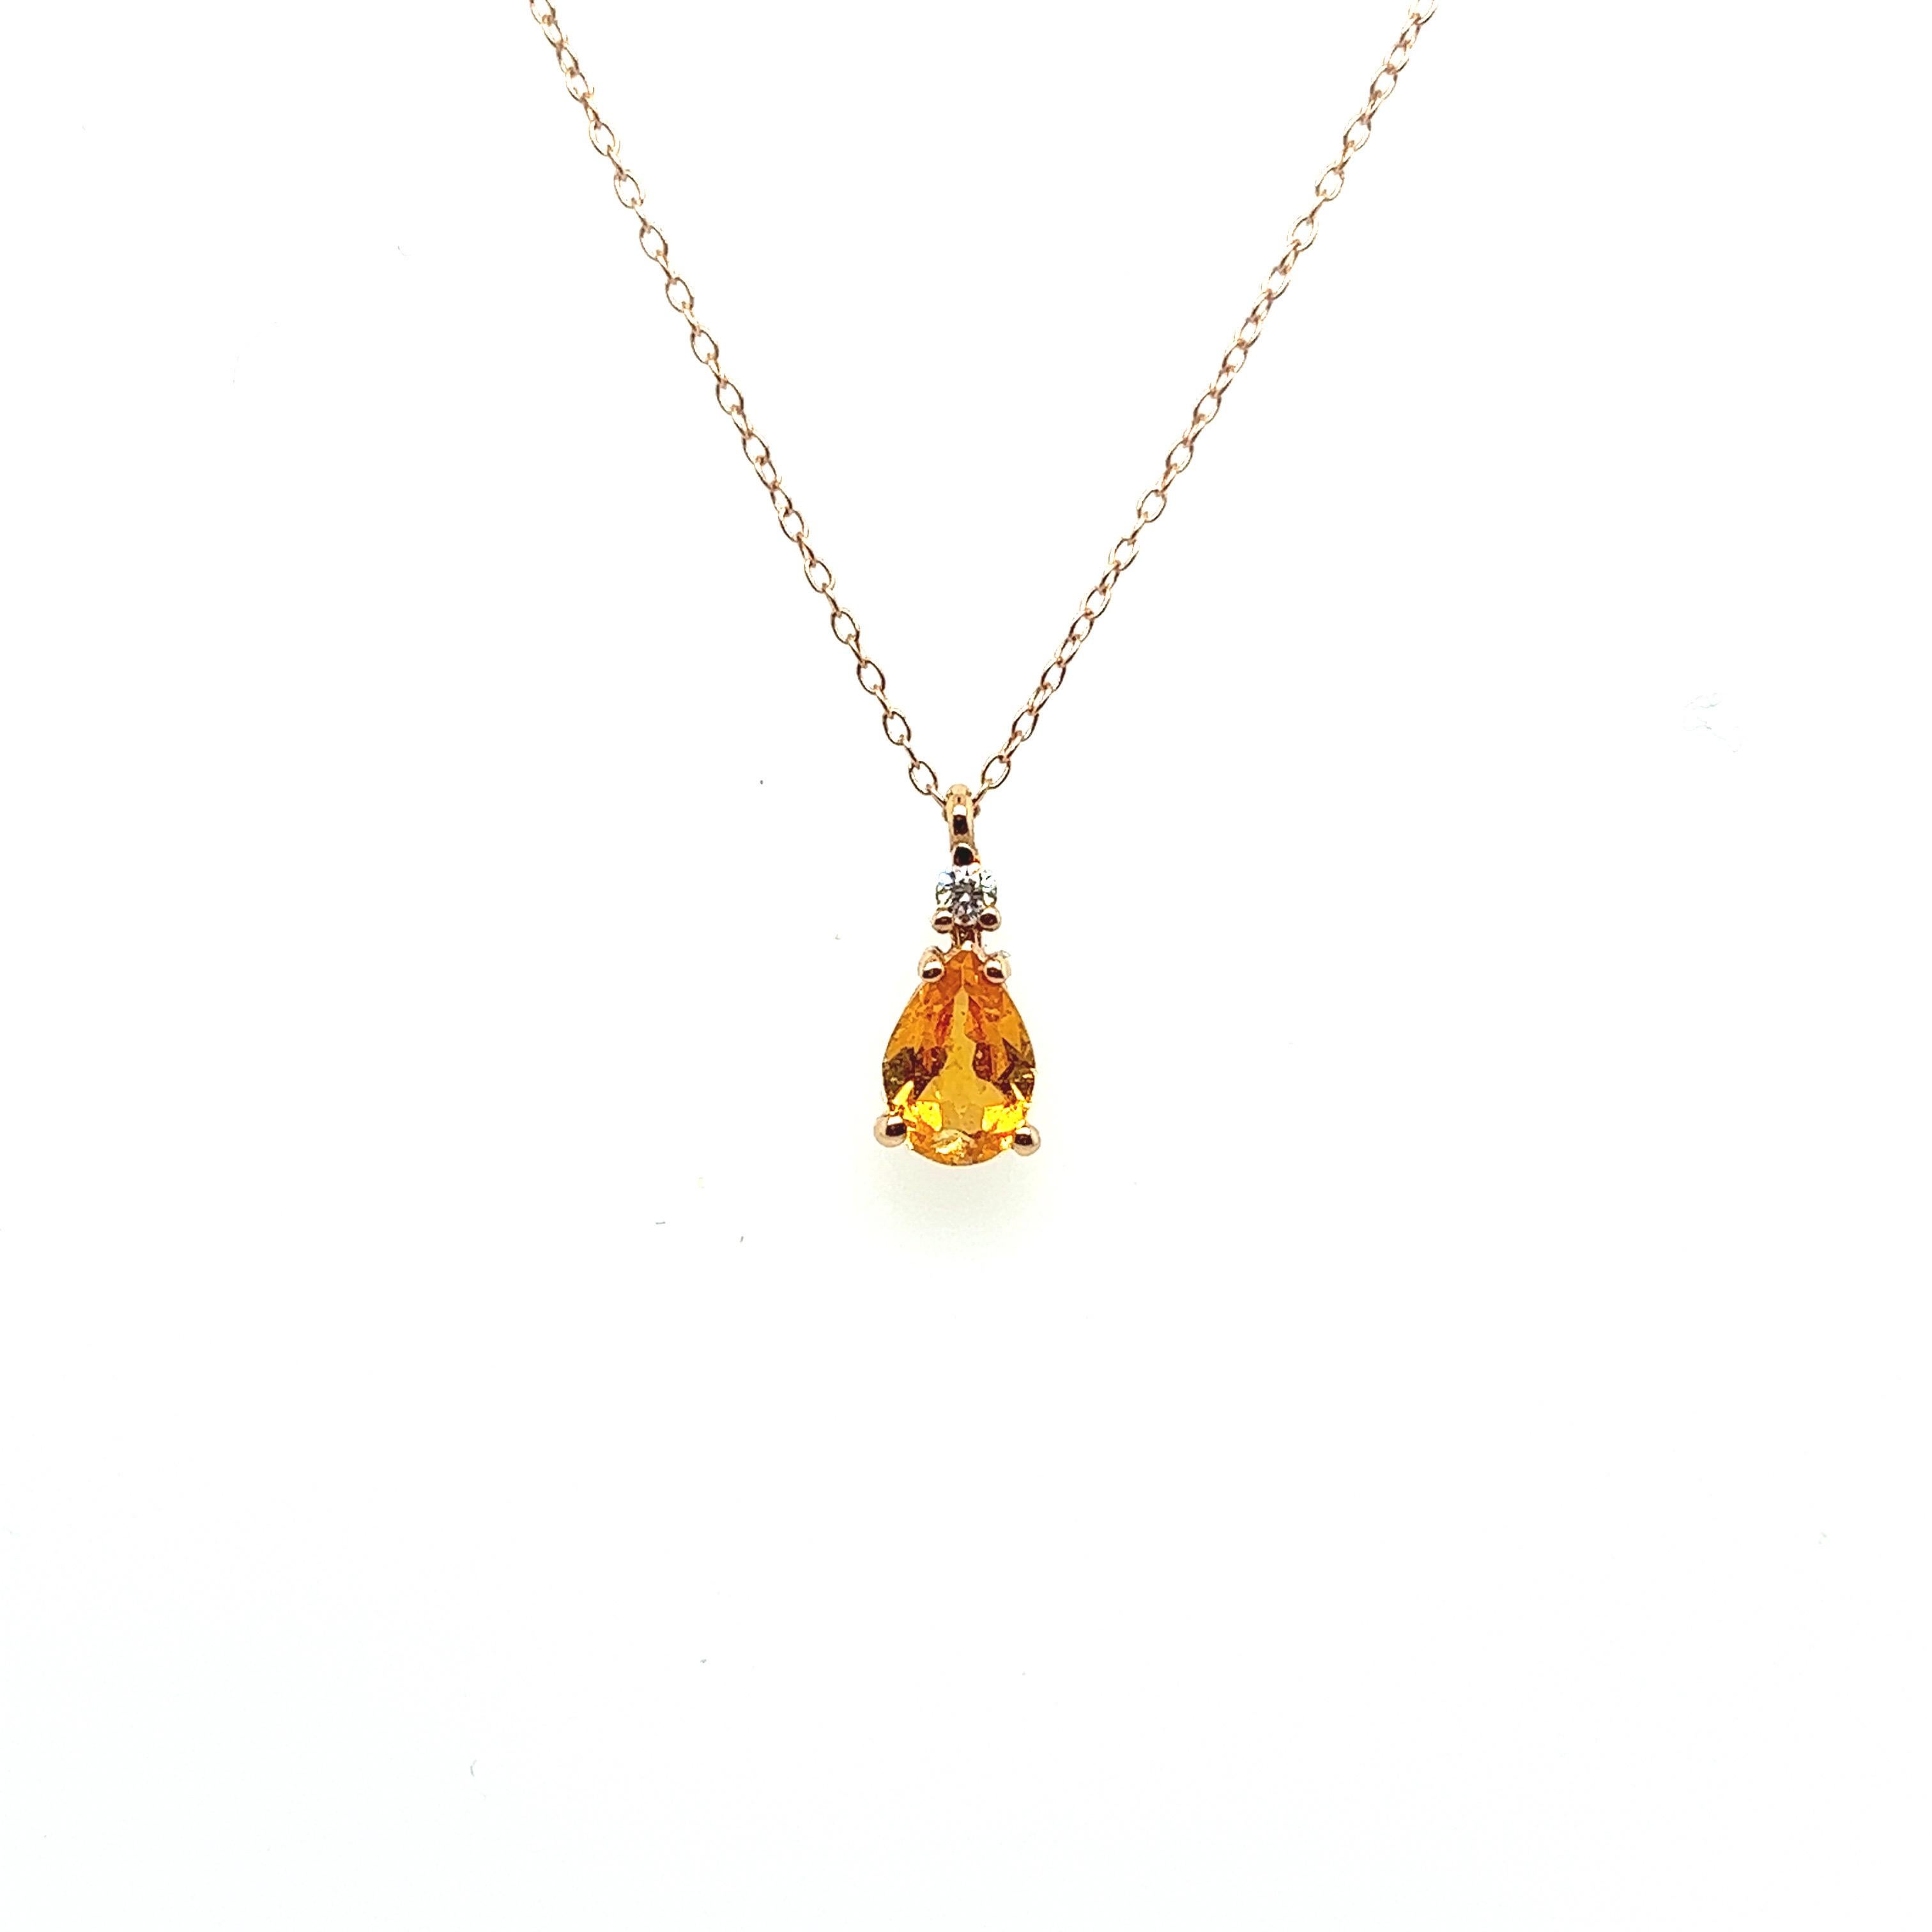 Pendant Necklace Mandarin Garnet Diamond Rose Gold 

Beautiful 18K pink gold necklace topped with a 45 cm chain. It will catch the eye with its magnificent pear-shaped garnet mandarin stone. The stone is held by 2 times 2 18 carat pink gold claws.